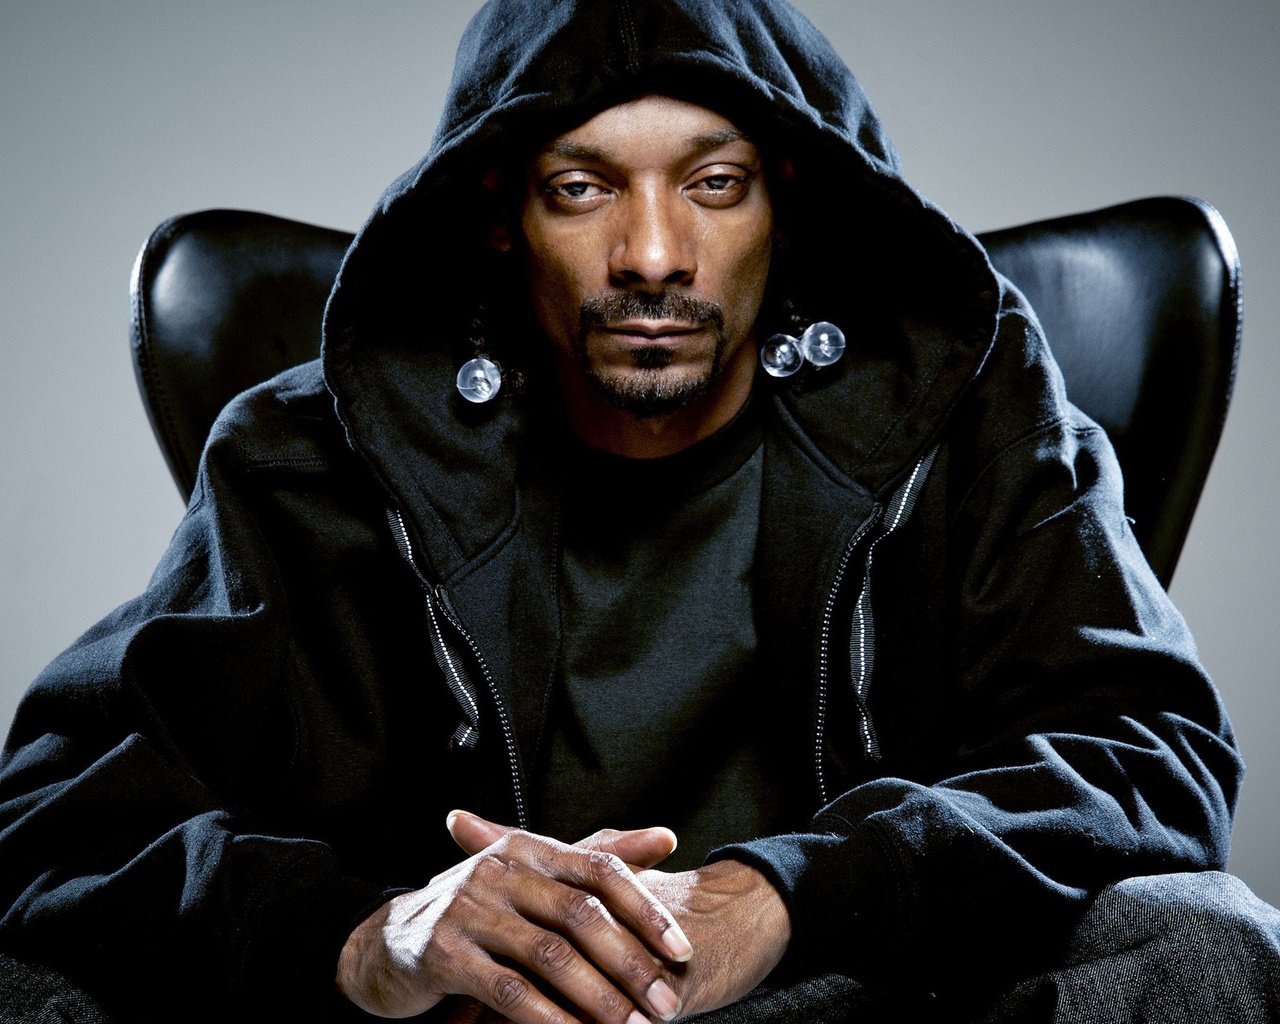 Snoop Dog for 1280 x 1024 resolution